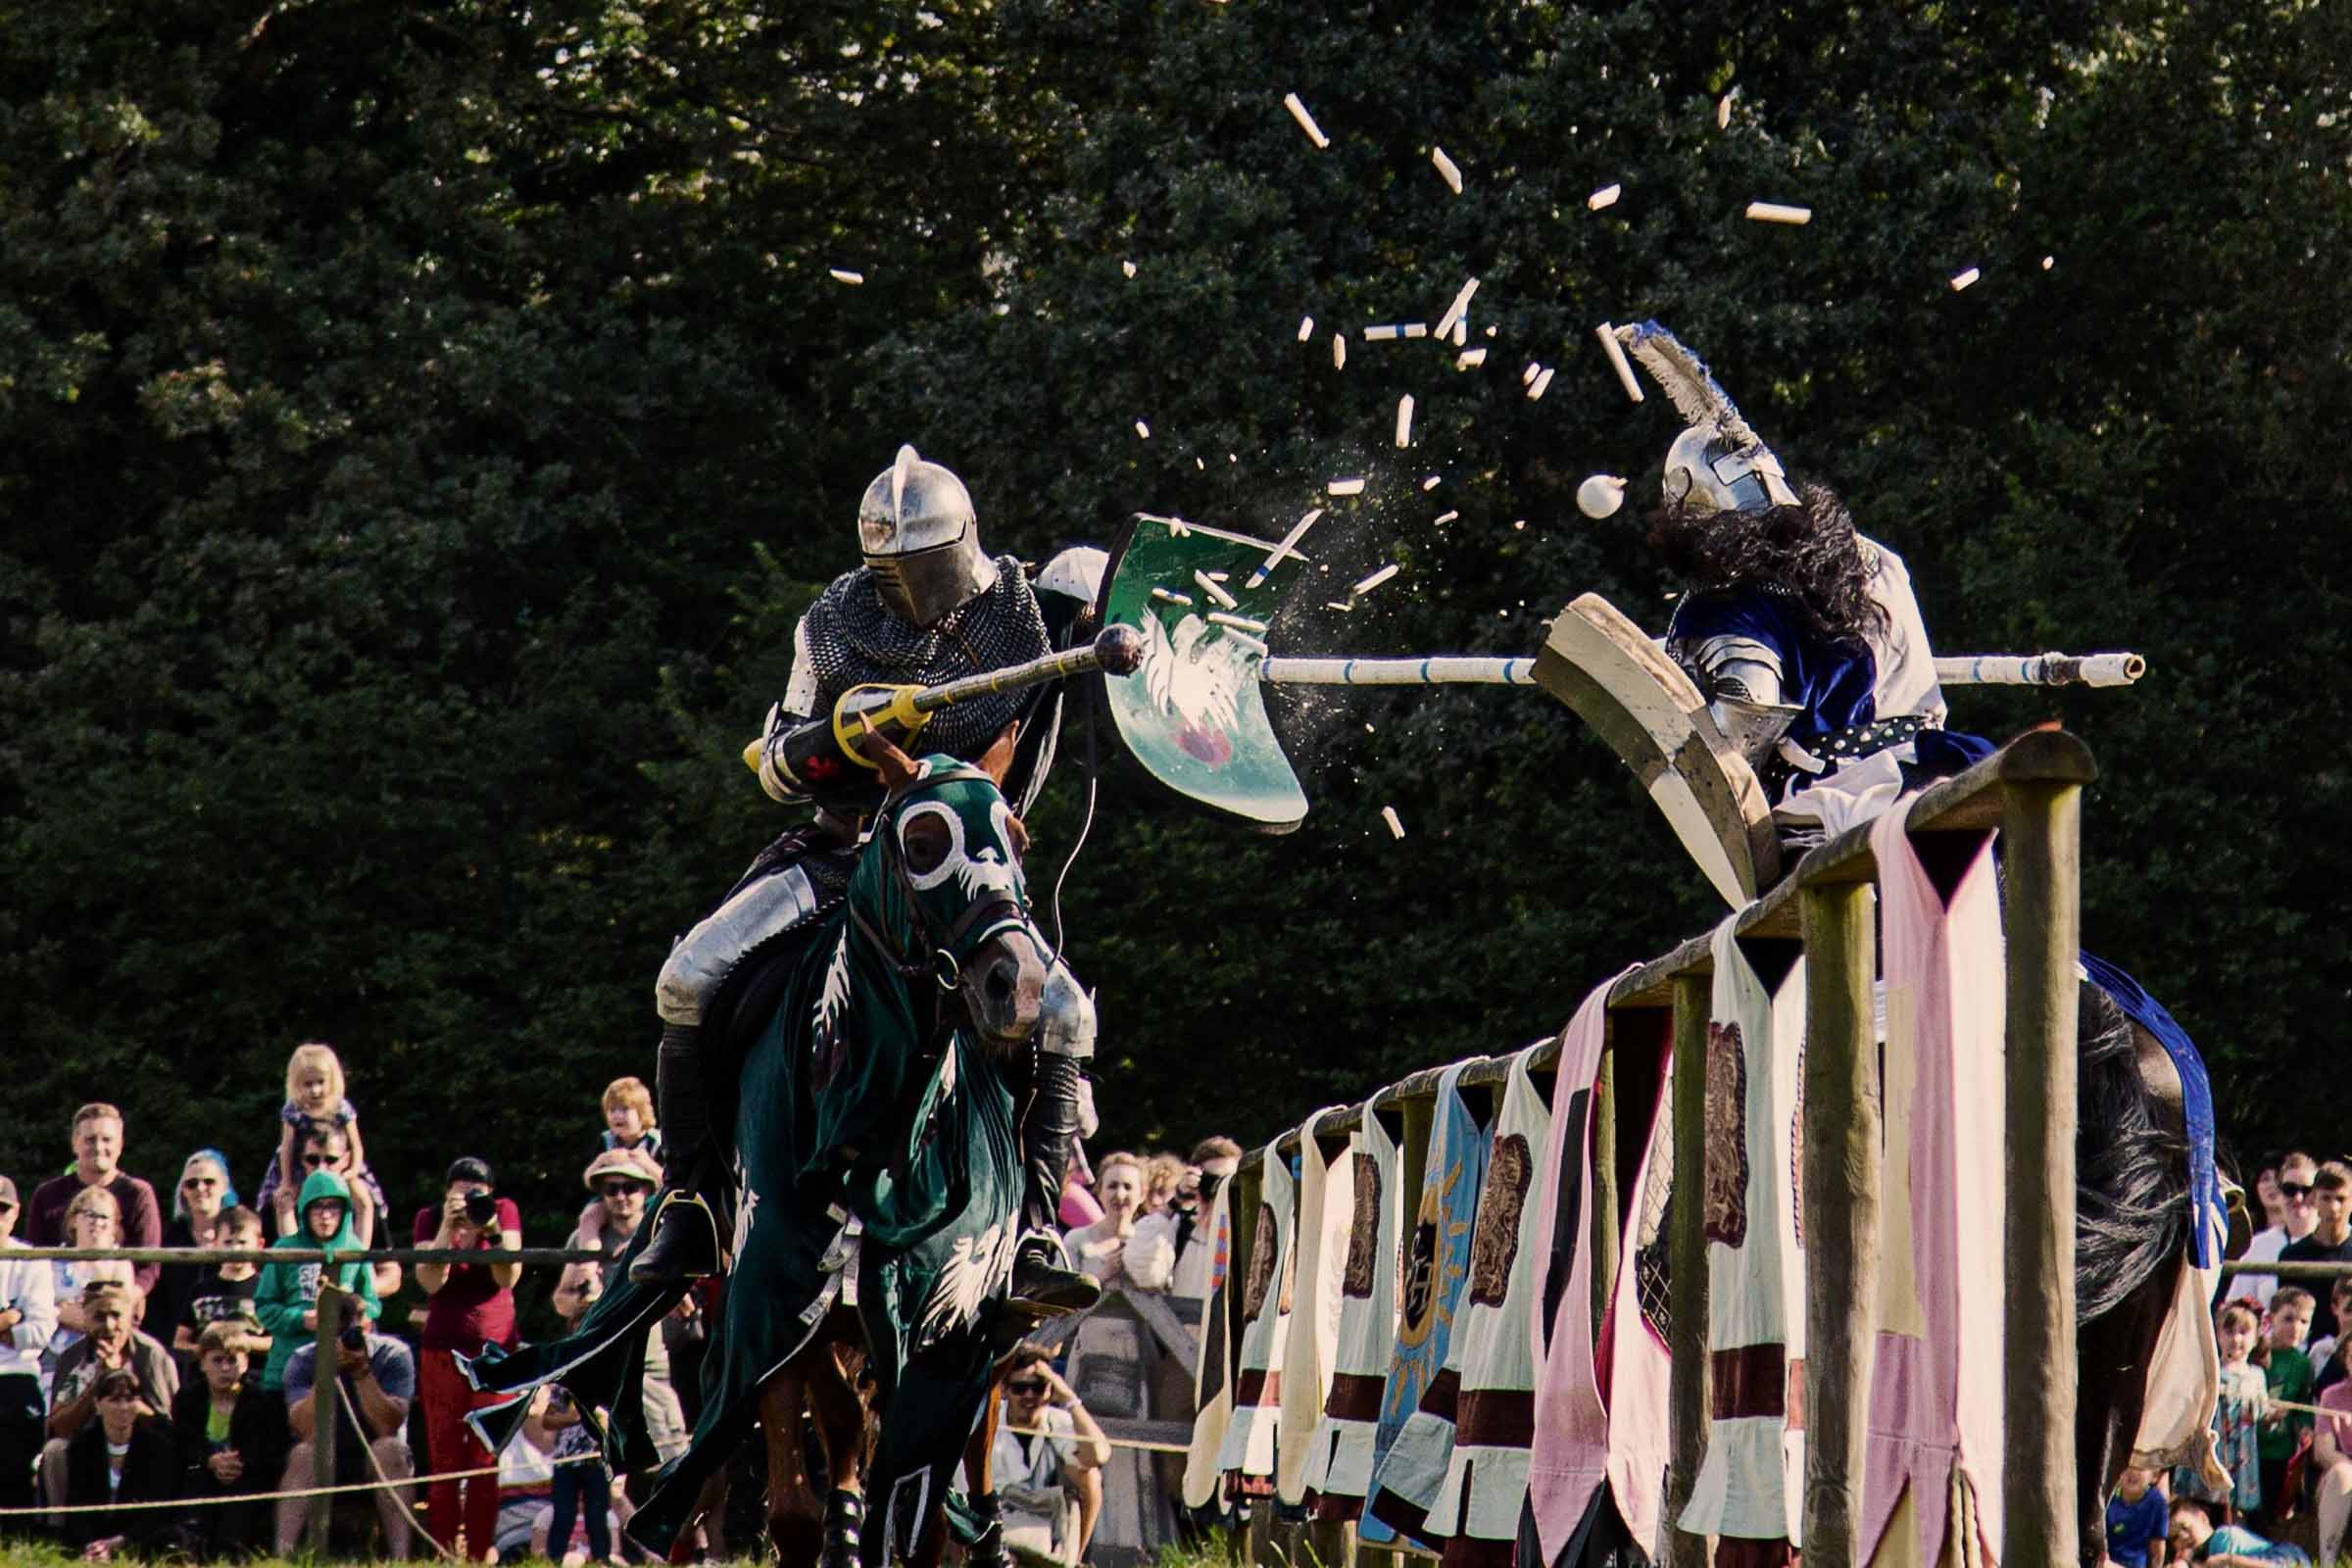 A lance is smashed during a Joust in action at Loxwood